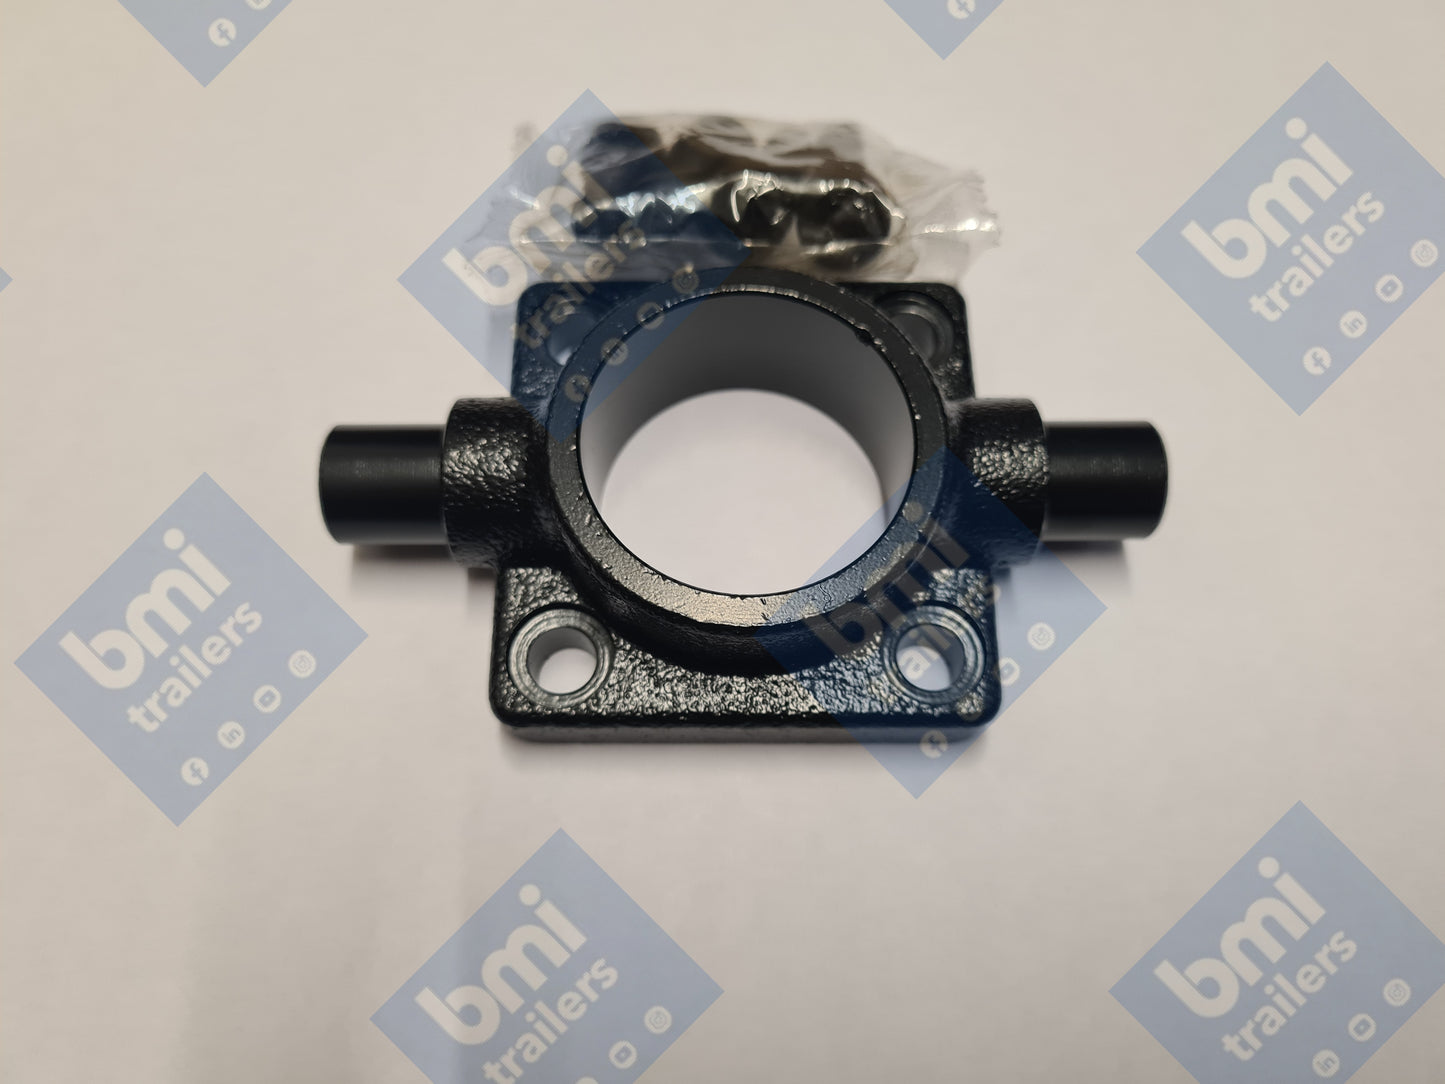 PN 0161 ----- F-KF50FTC (TRUNION MOUNT + CLEVIS) NELSON